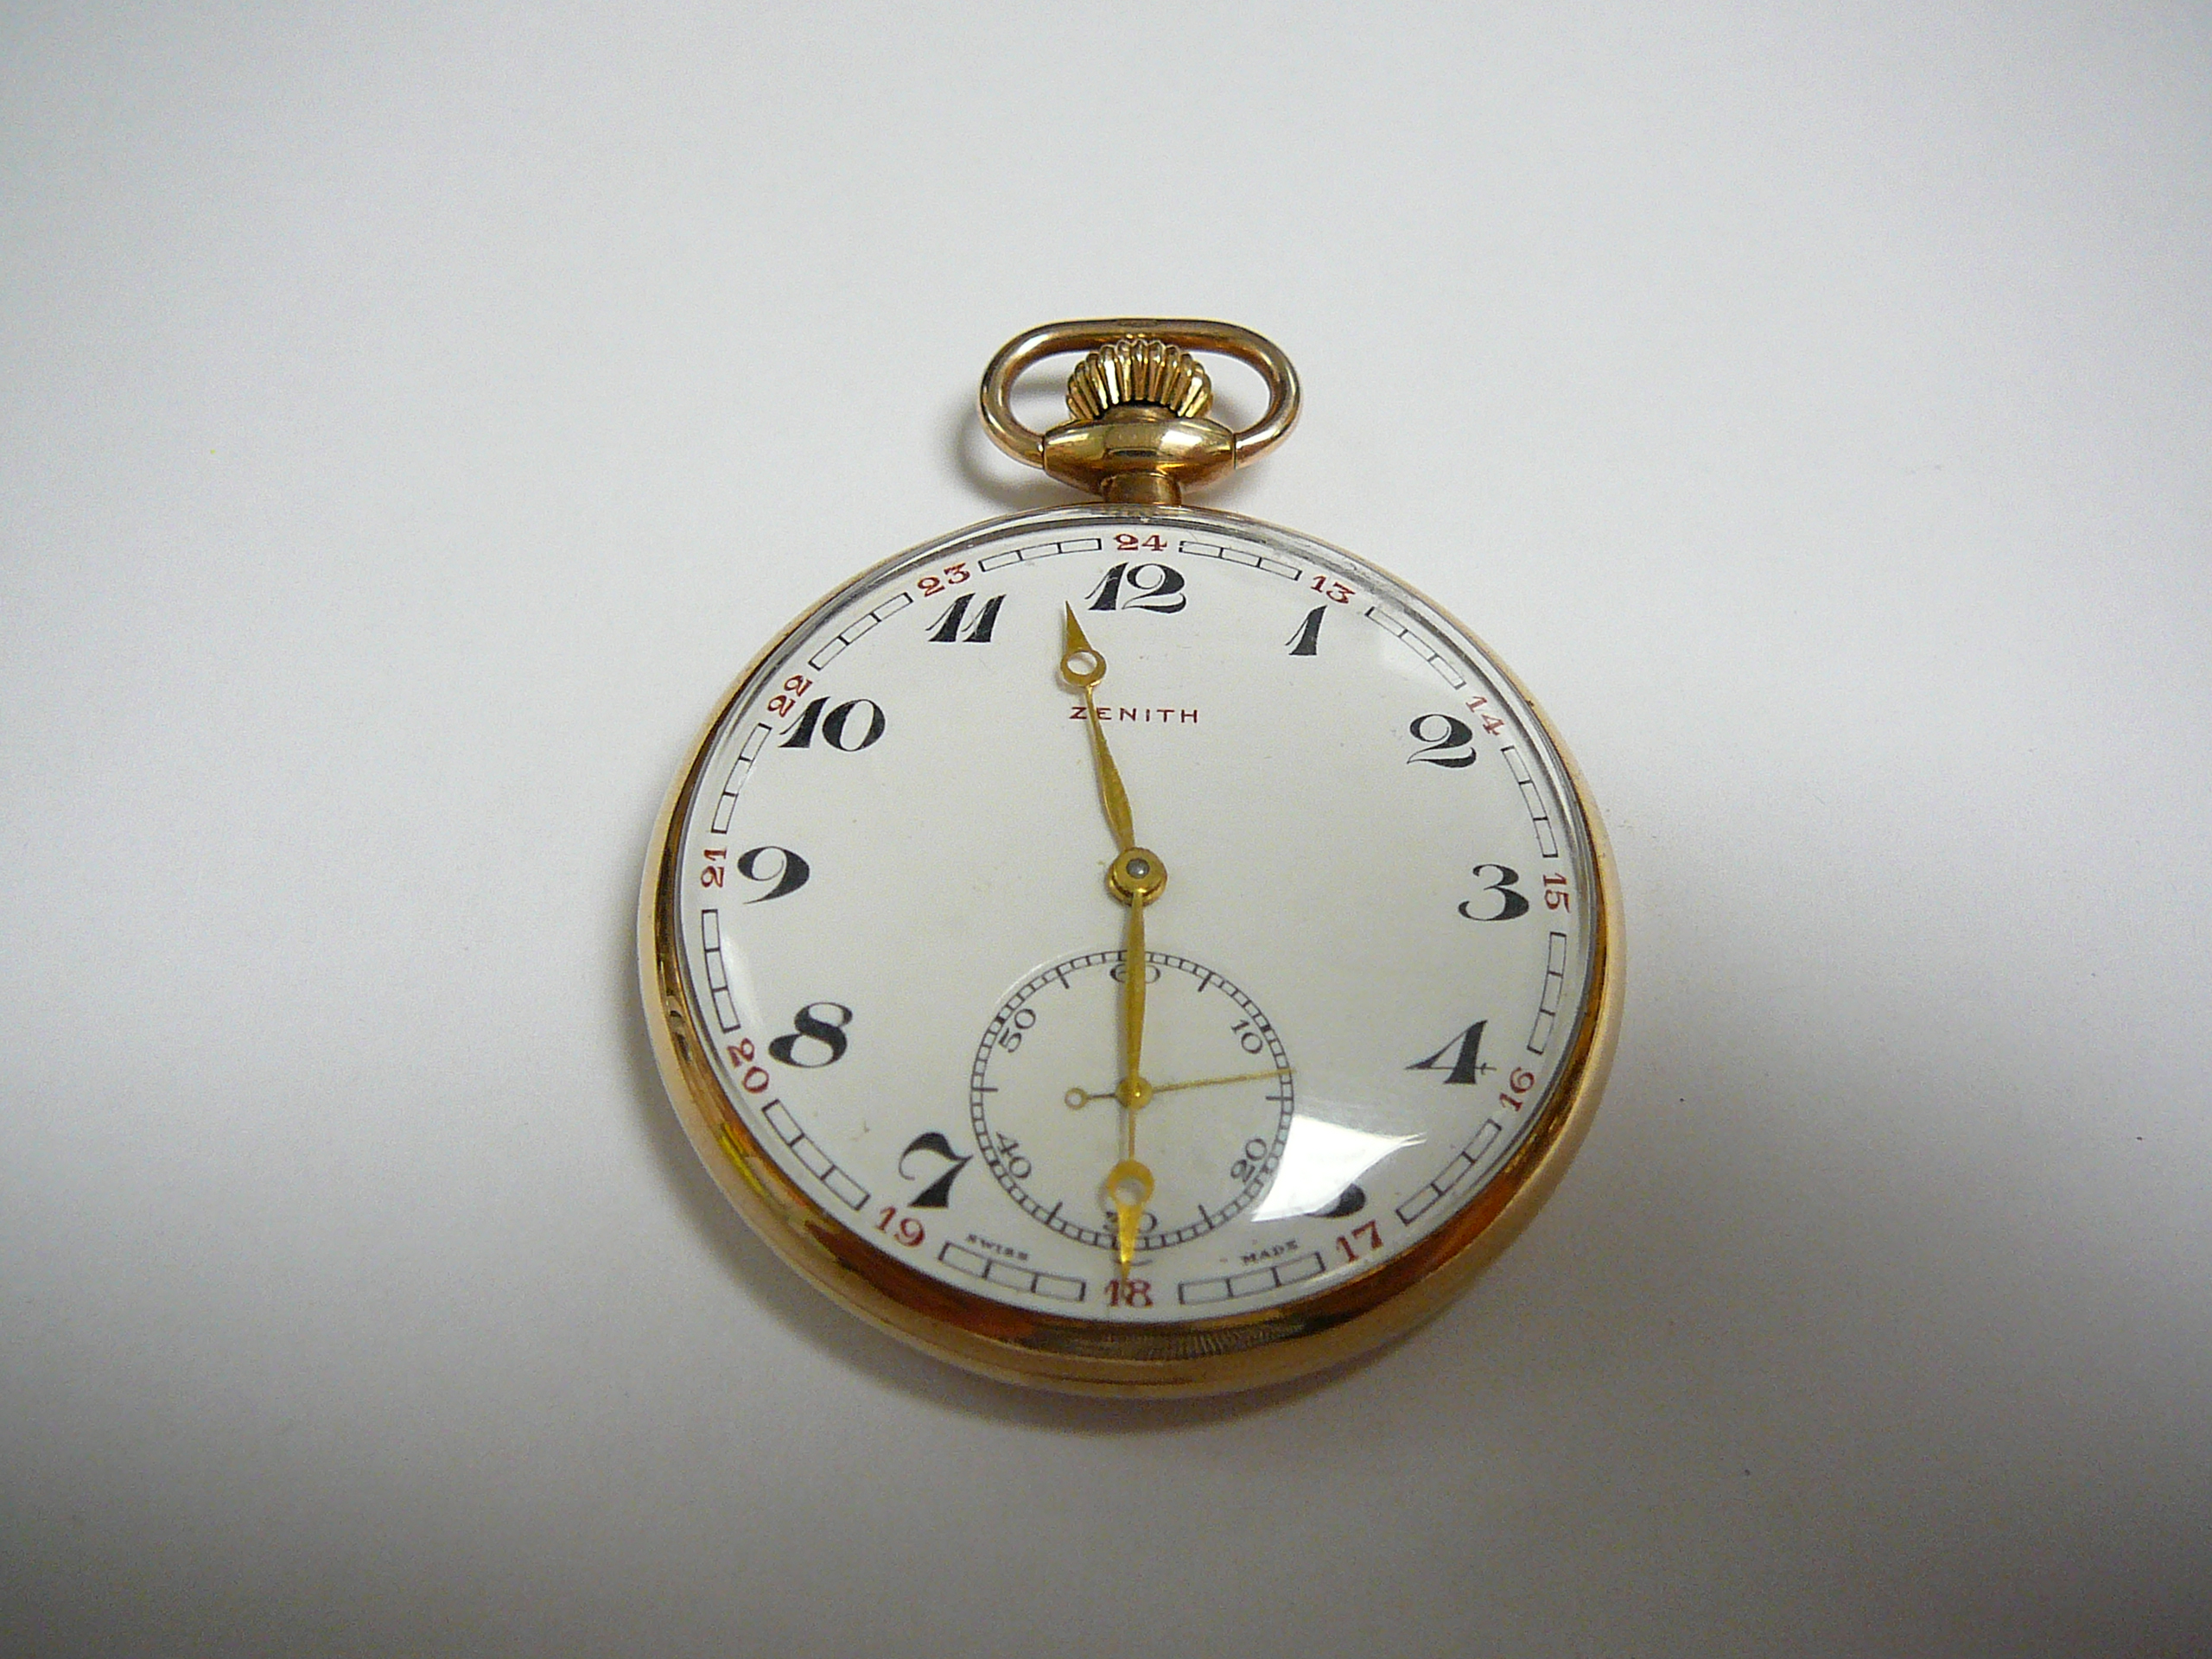 Gents gold Zenith pocketwatch - Image 10 of 10